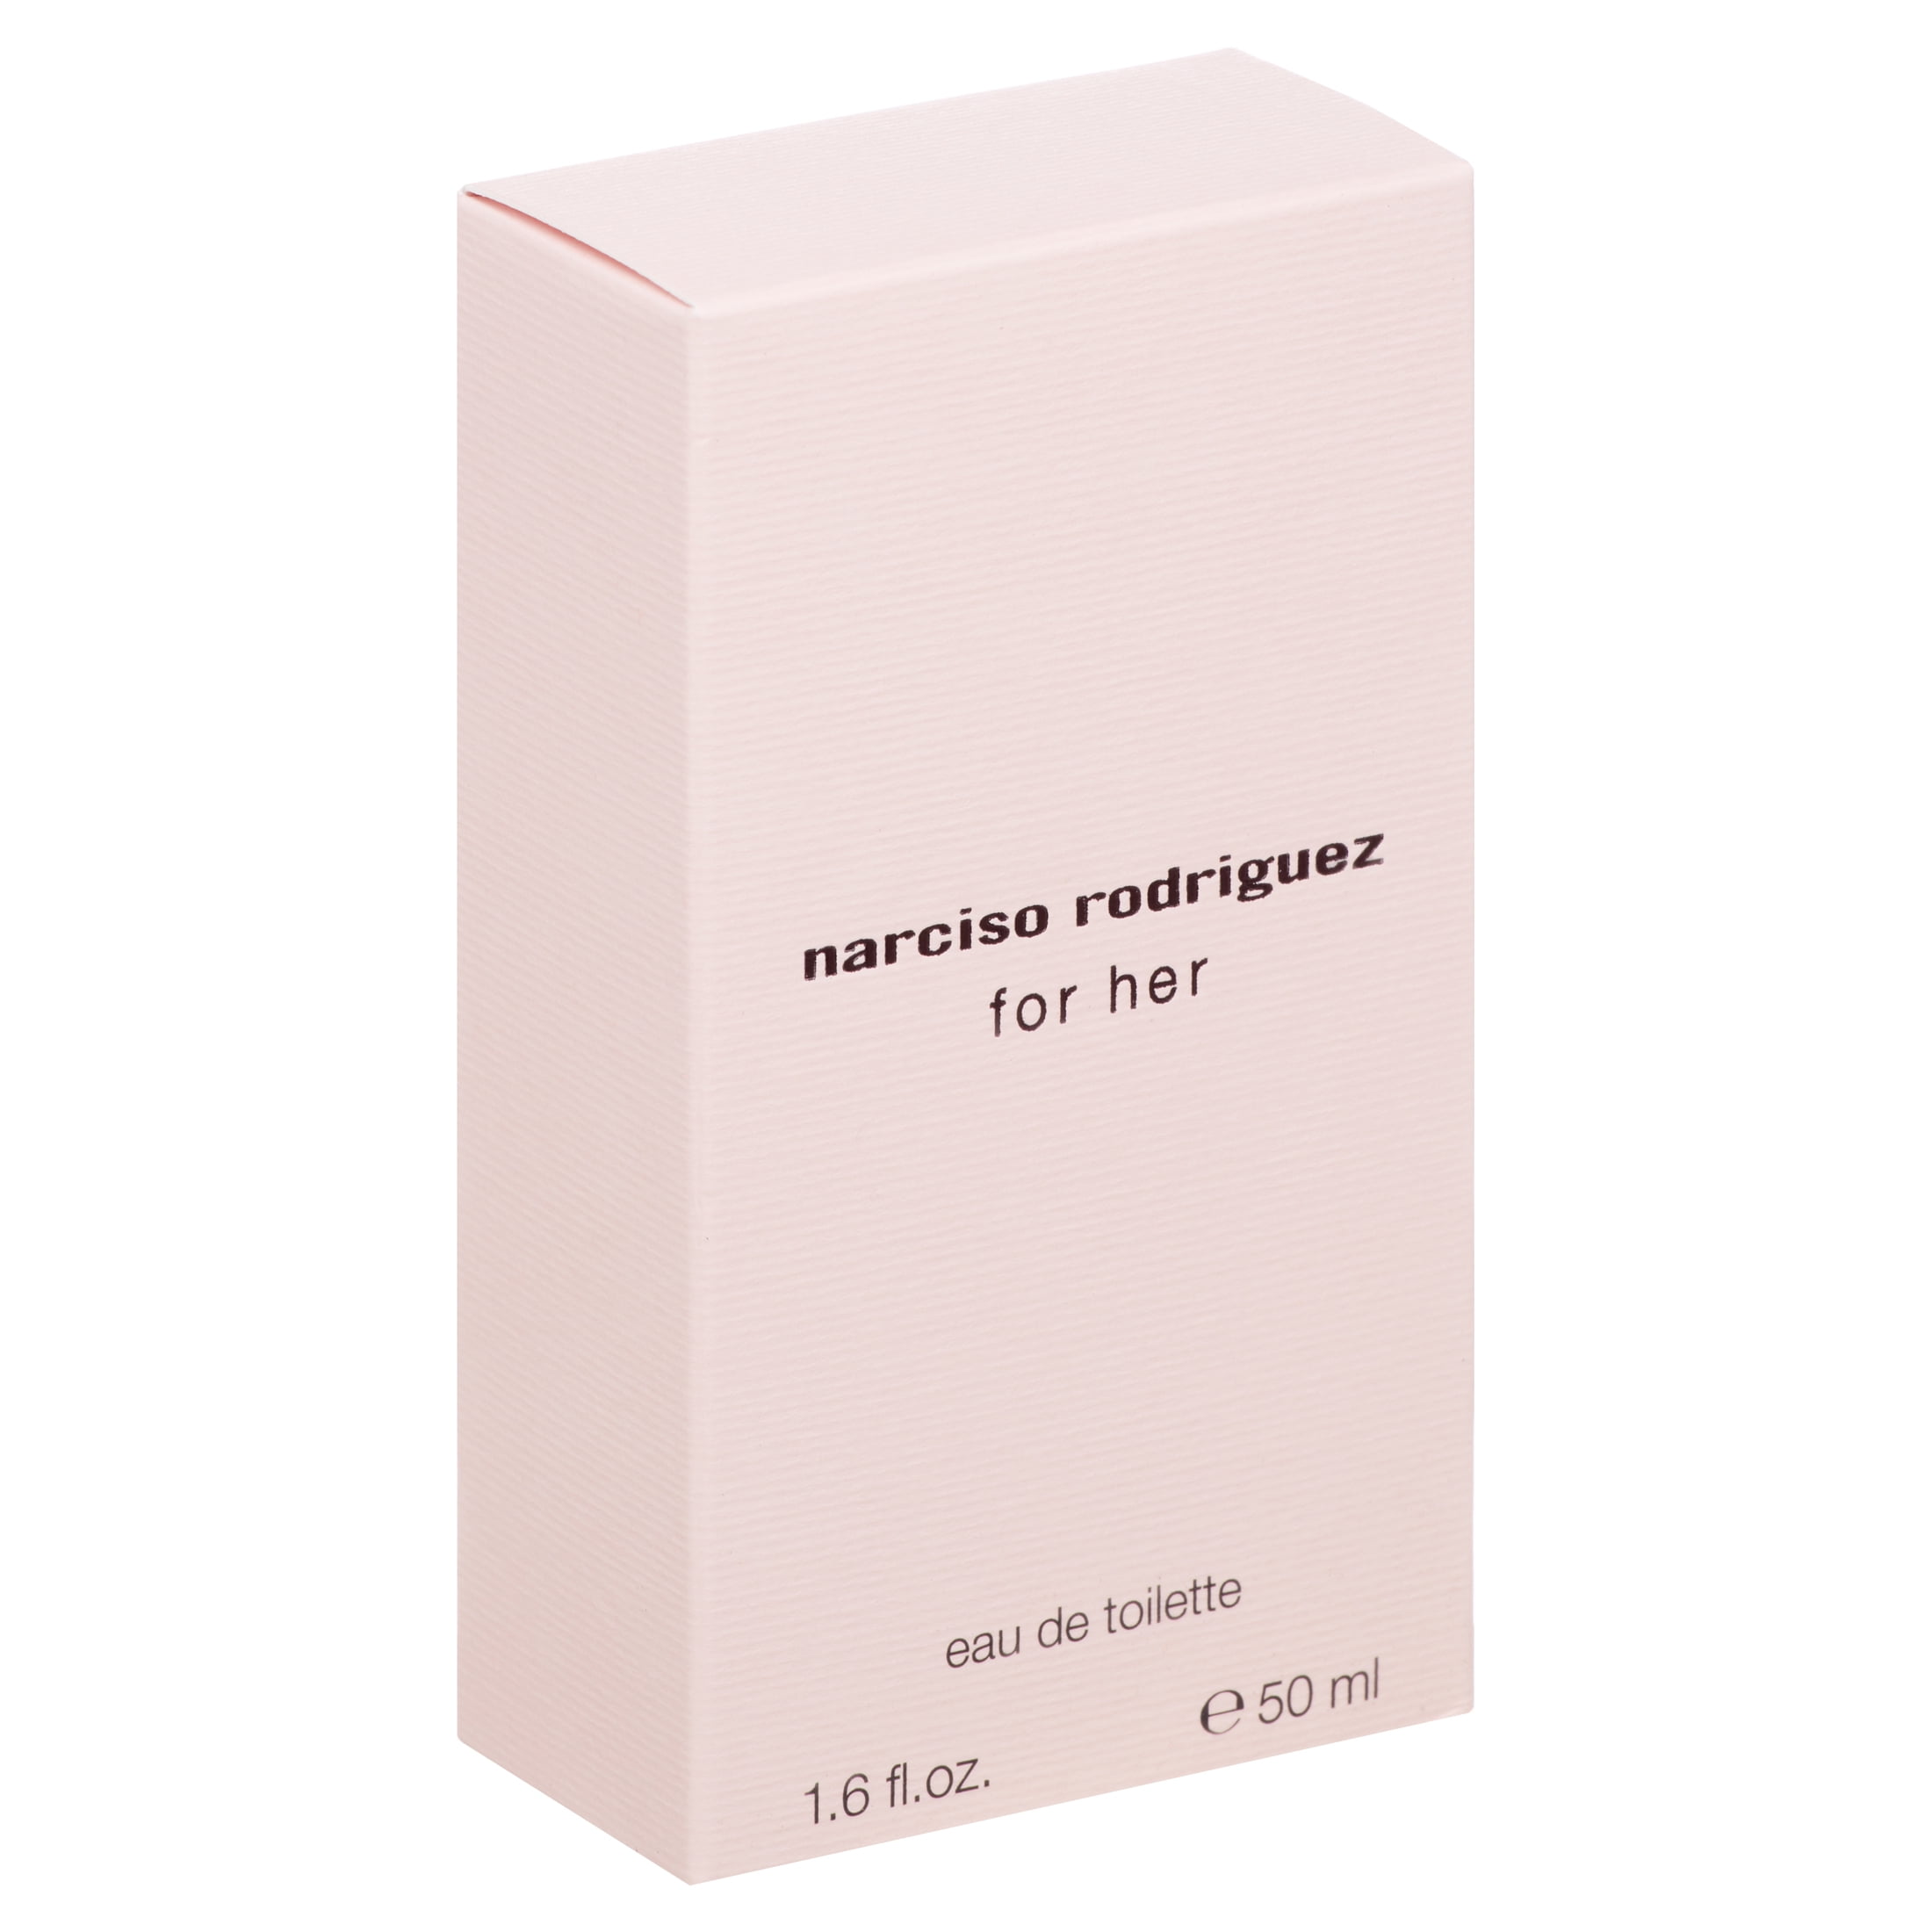 Narciso Rodriguez EDT for Women oz 1.6 50 (3423470890013) / ml NAR58